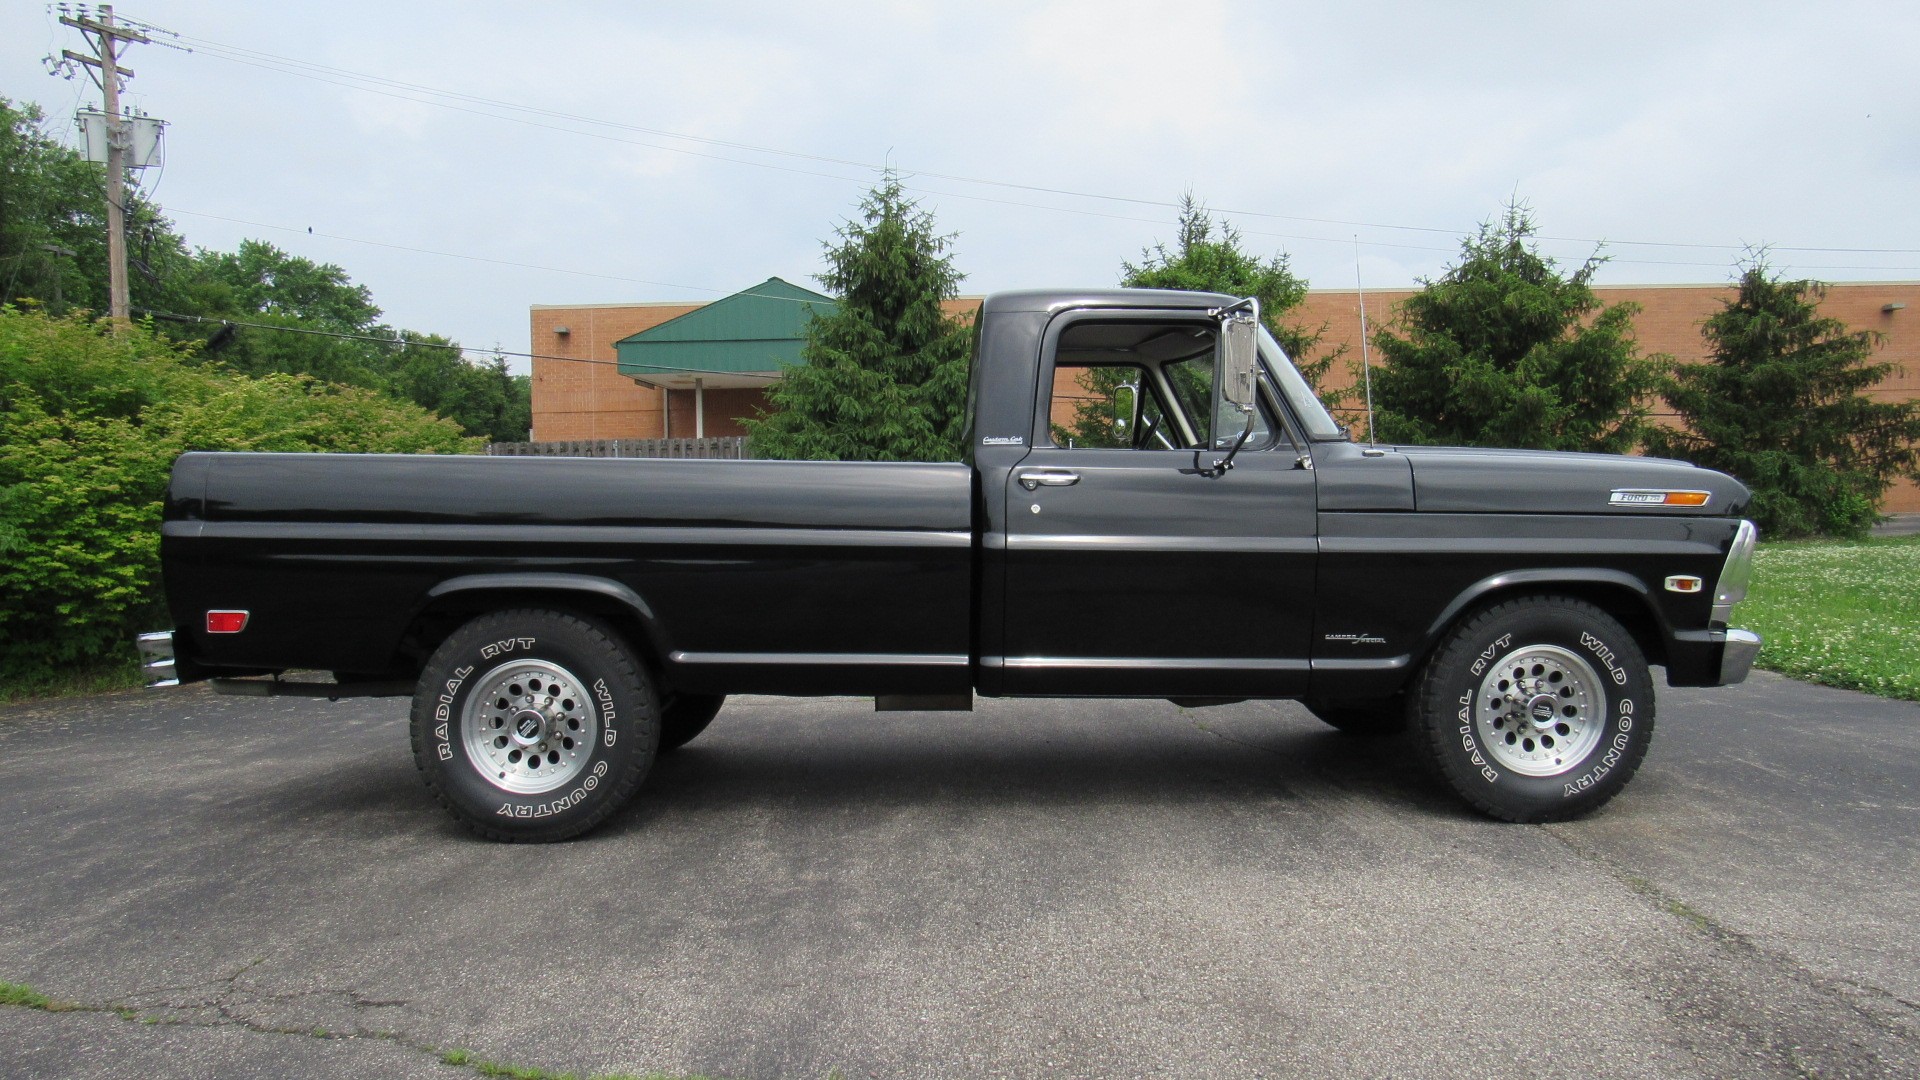 1968 F250, 1 Owner, 4 Speed, 72K Miles, SOLD!